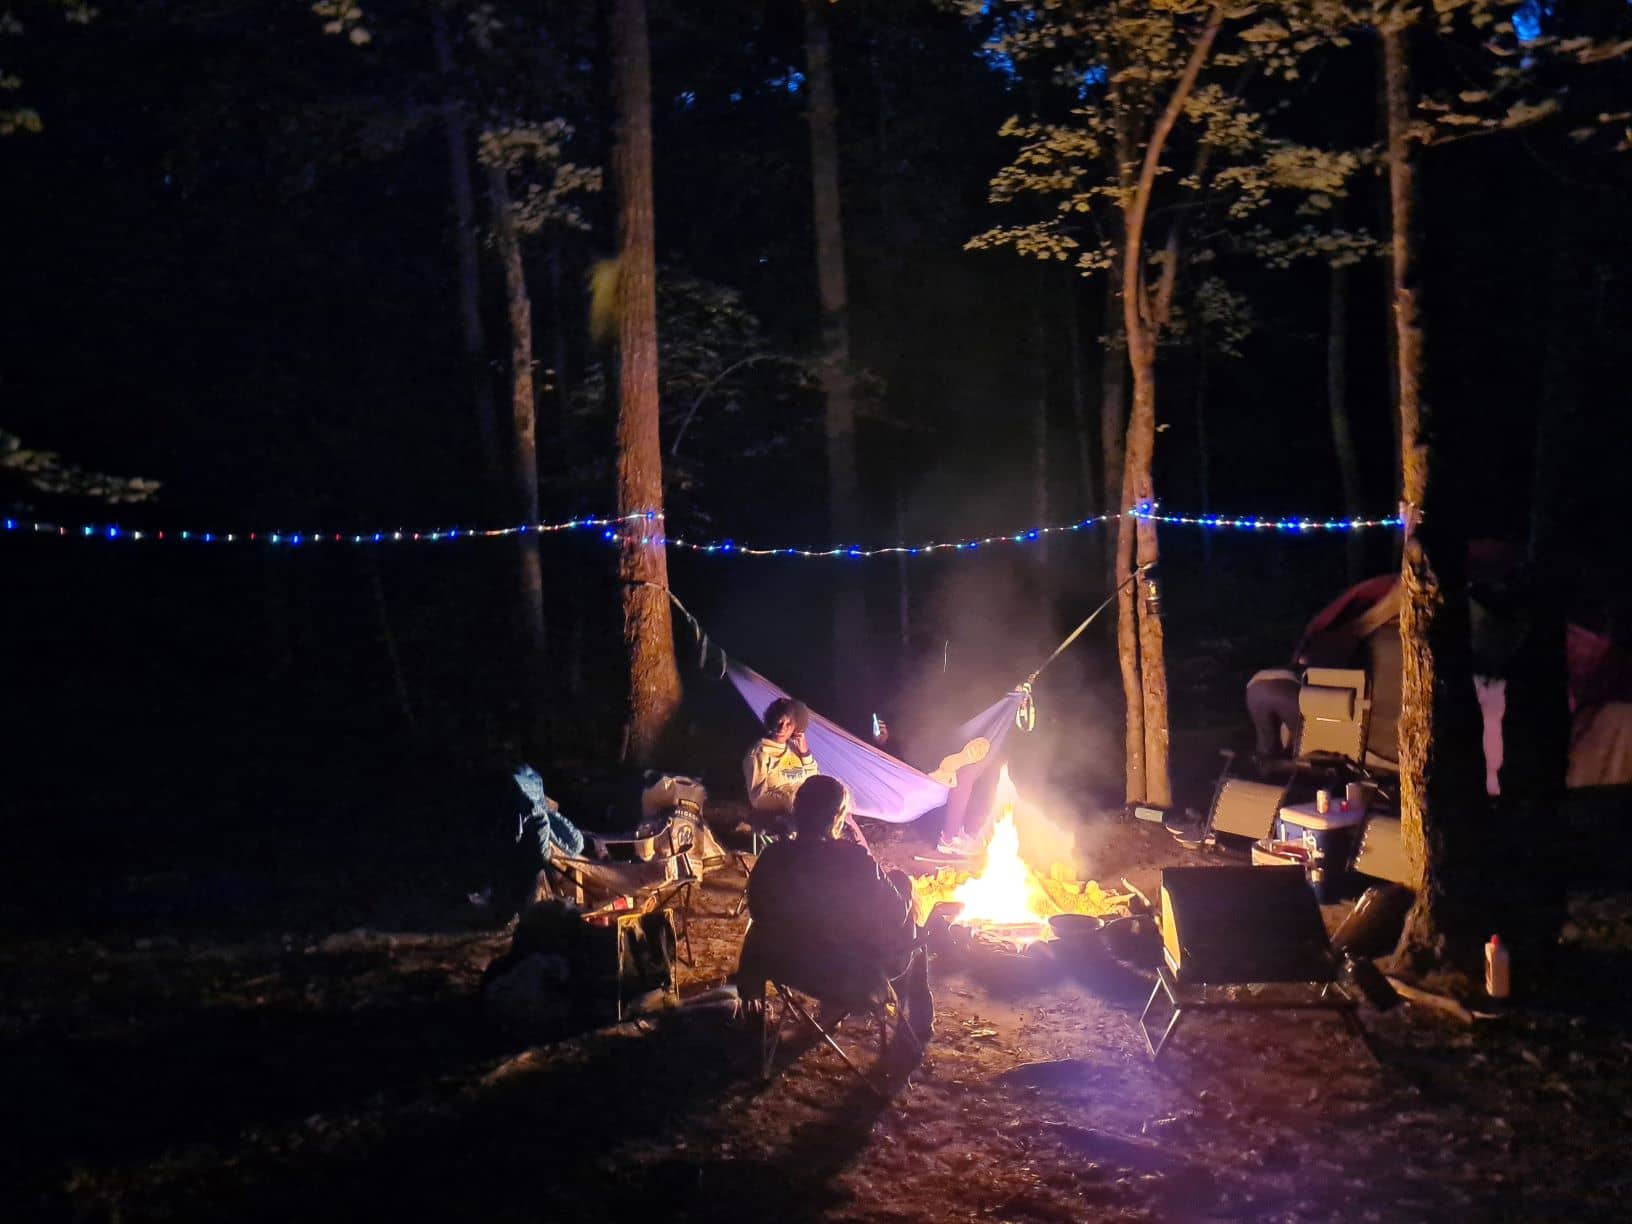 Twinkle lights camping in Tennesee